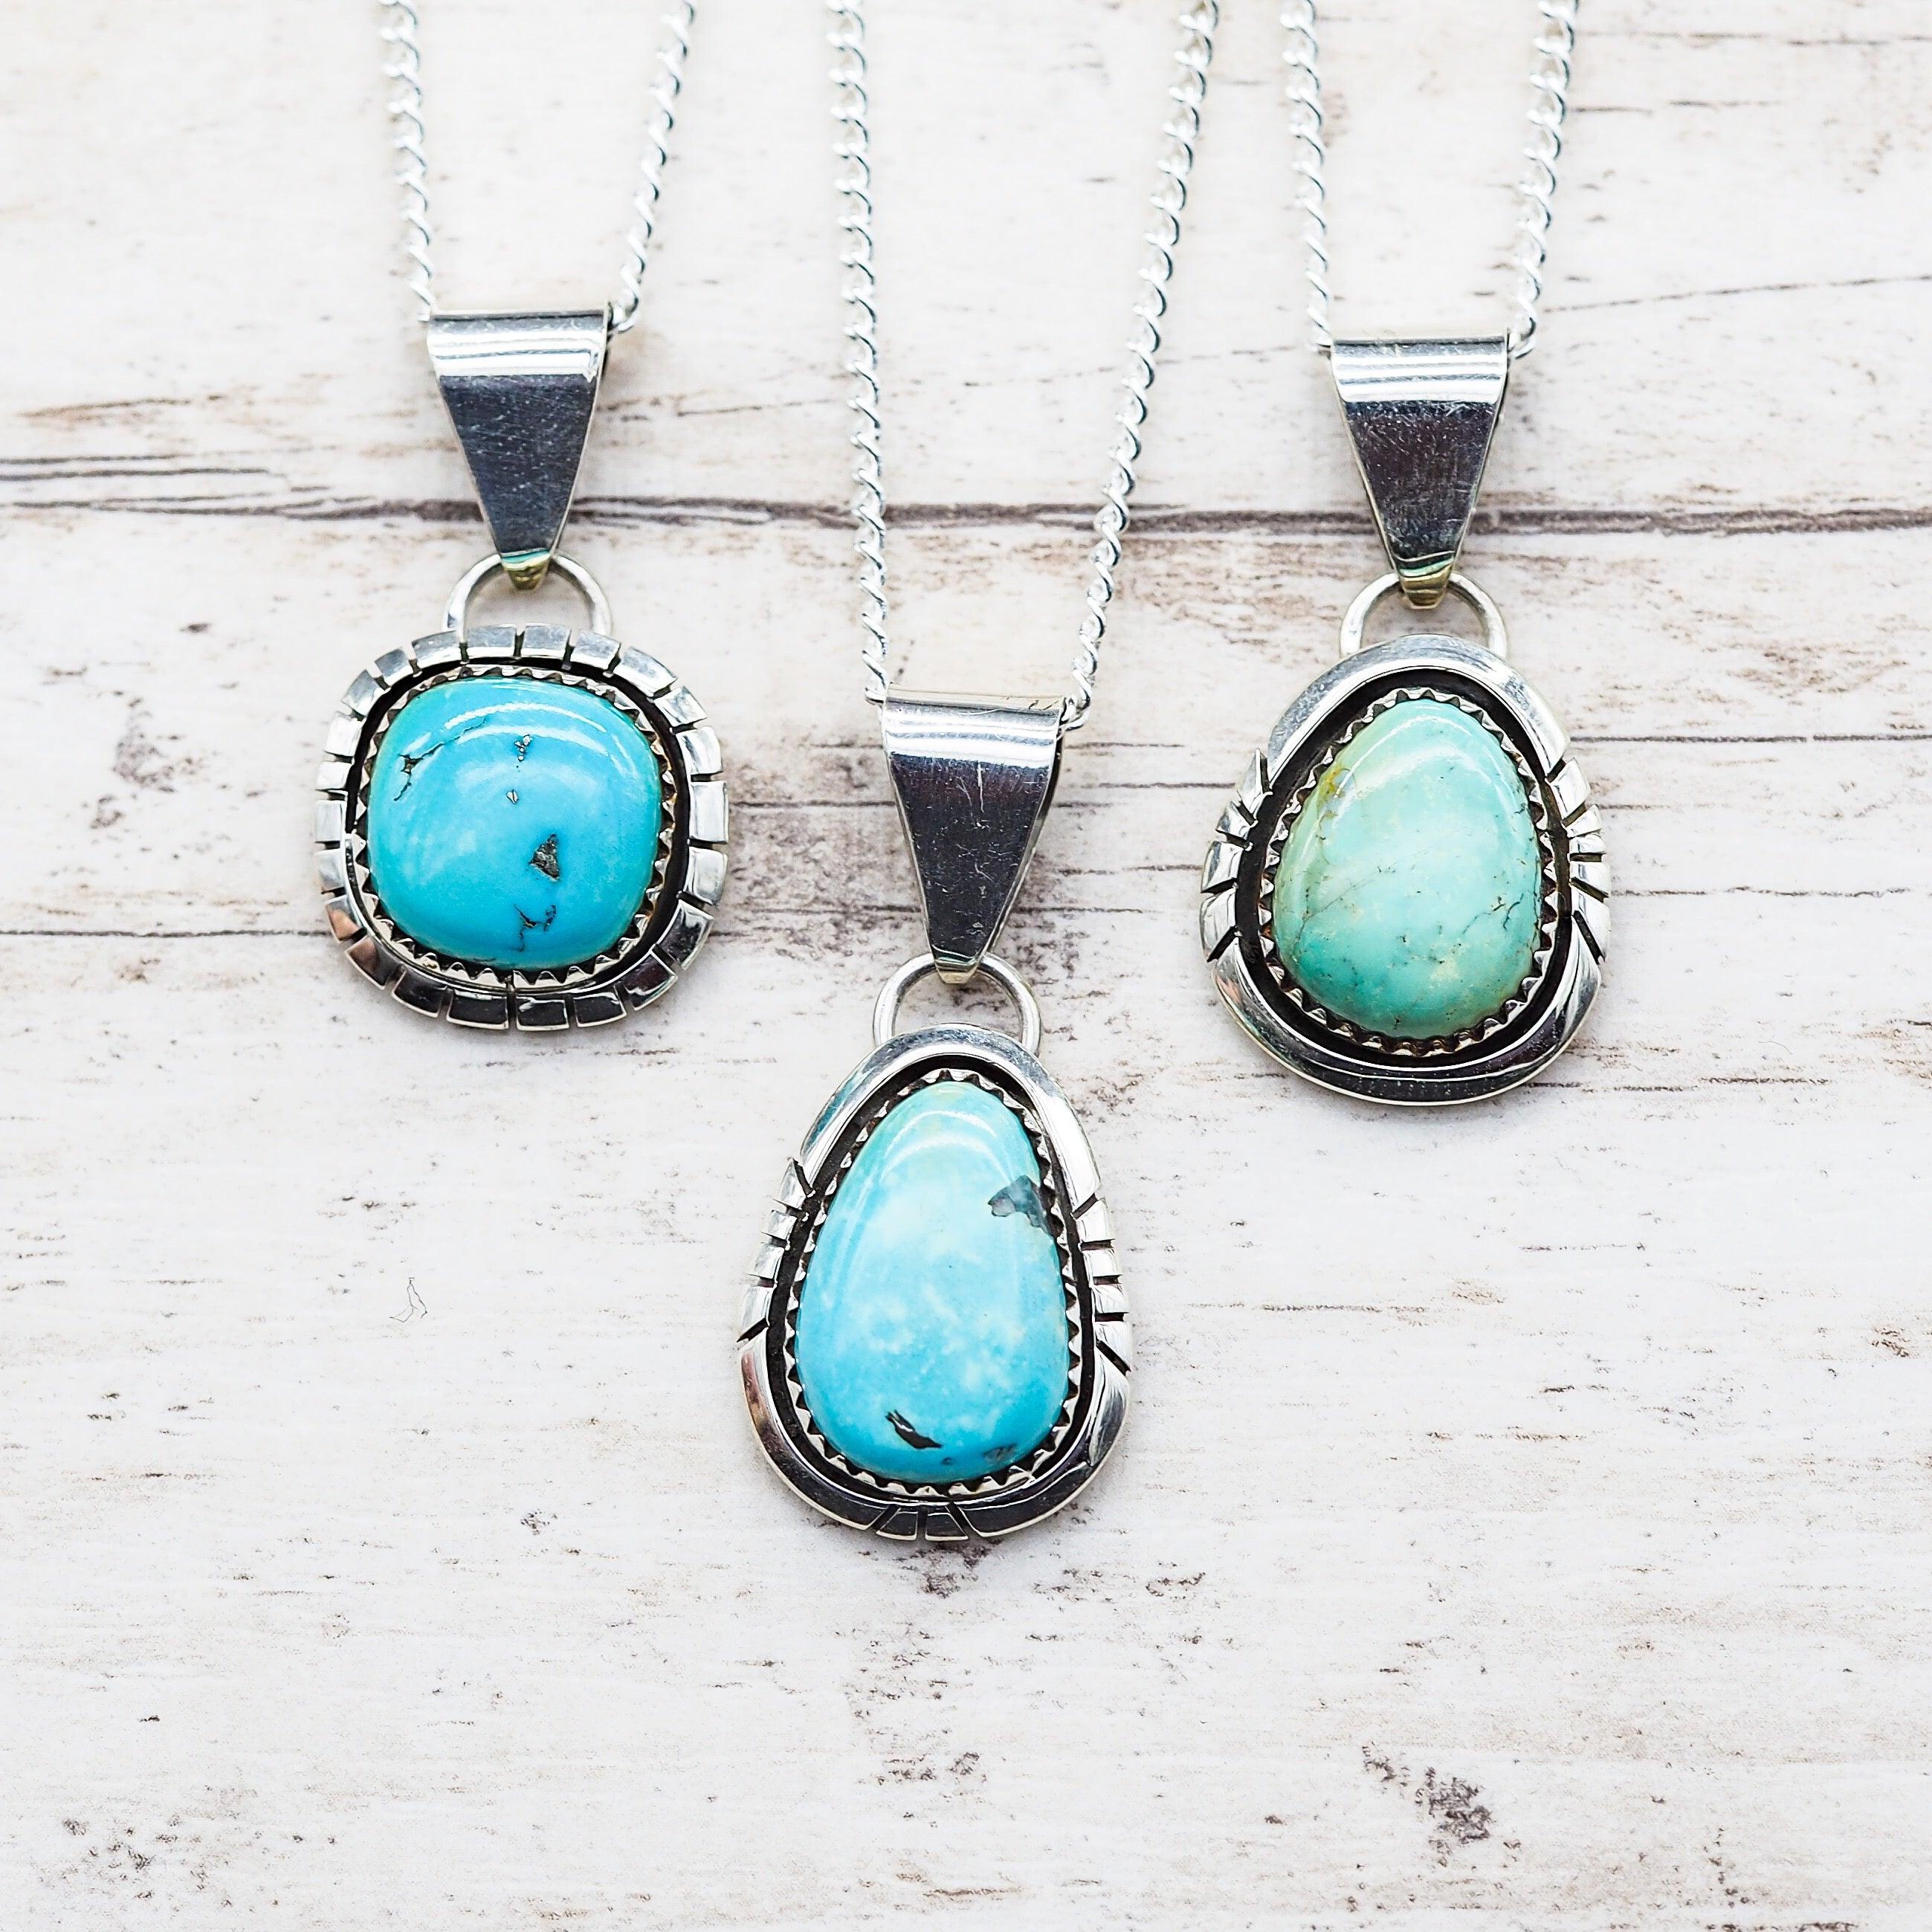 Navajo Turquoise Pendant Necklace - womens jewellery by indie and harper